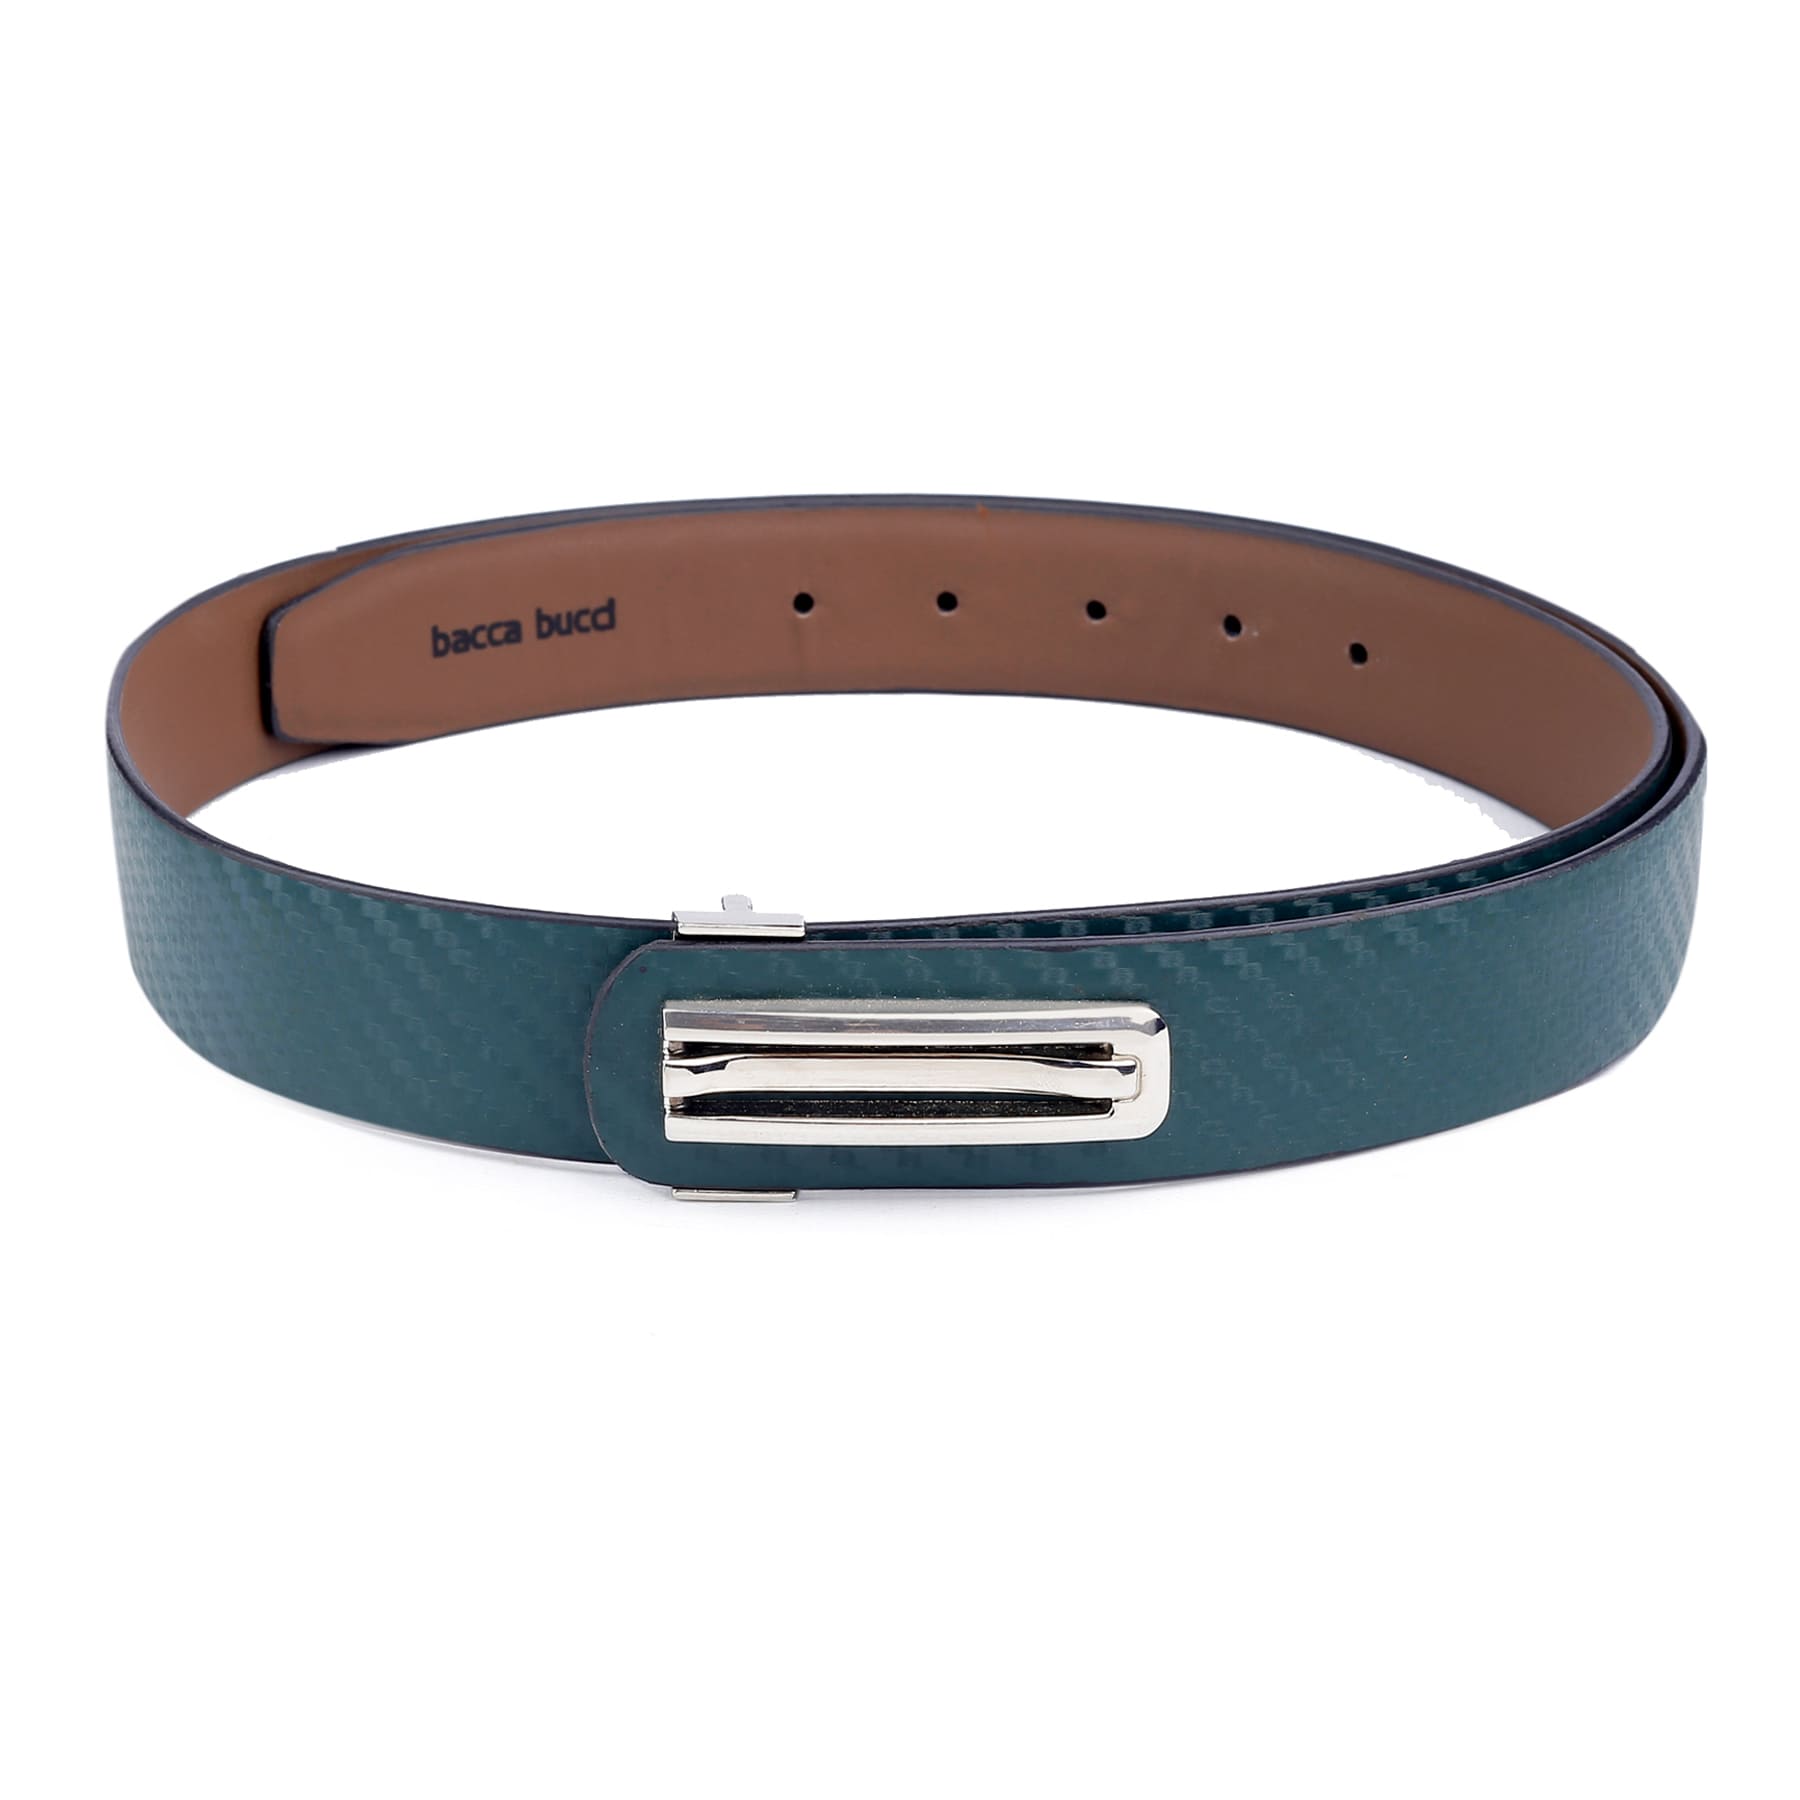 Bacca Bucci Men Belt with 3D texture and Pin buckle Nickle free | Casual and Dress Belts